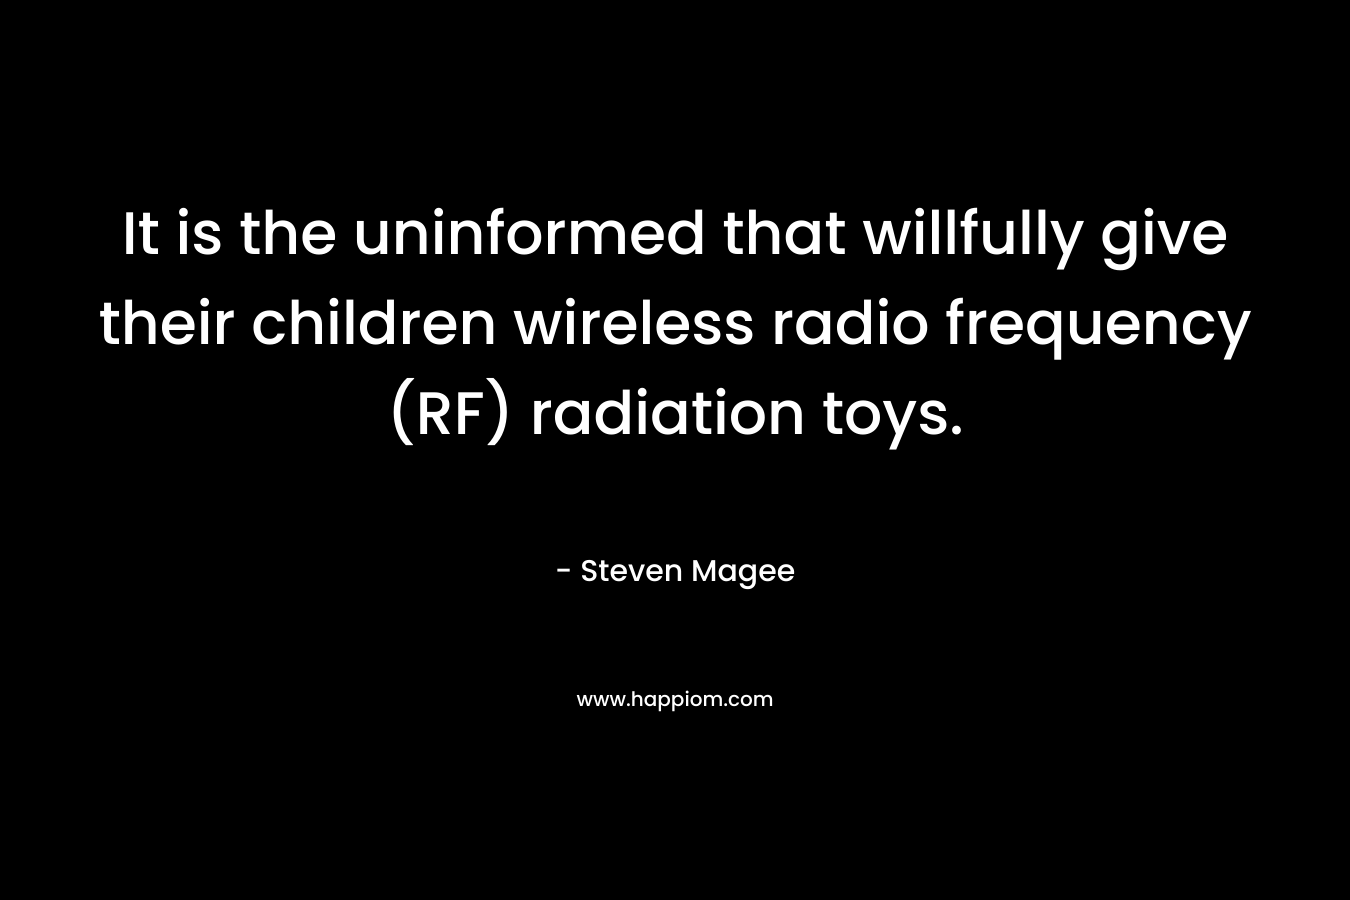 It is the uninformed that willfully give their children wireless radio frequency (RF) radiation toys.